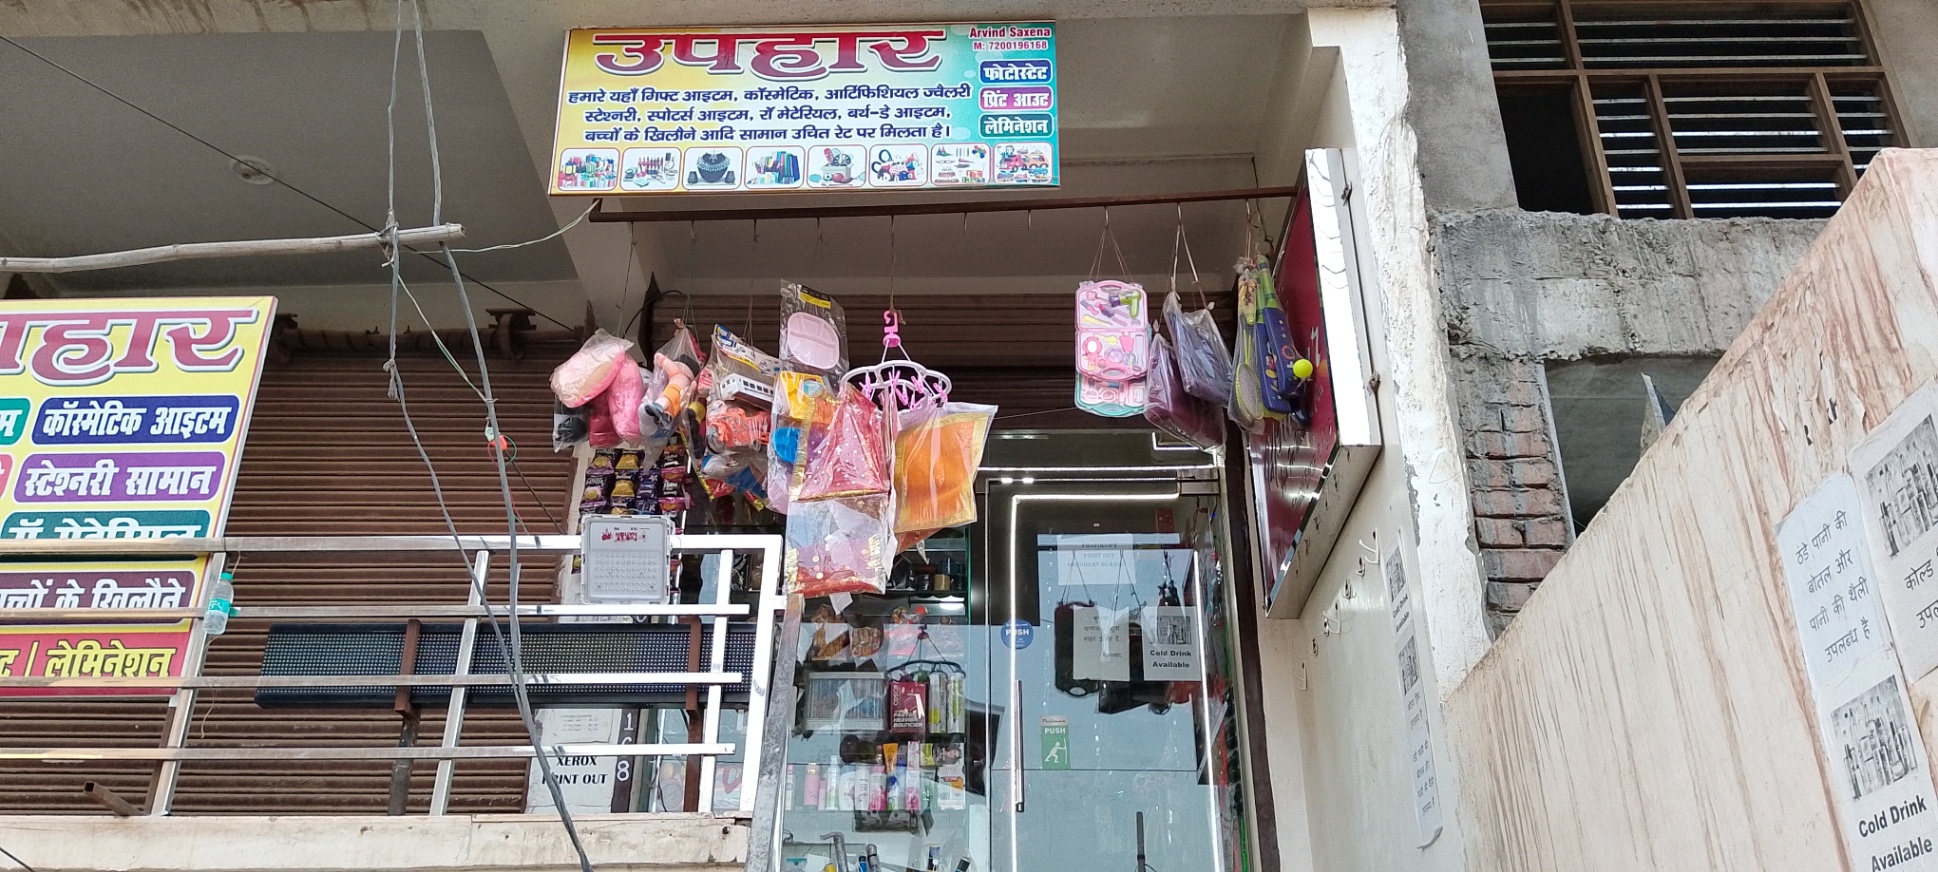 Sell Office/ Shop, 0 sq ft carpet area, Furnished for sale @Shanti Enclave Shopping Complex Maruti City Road Agra